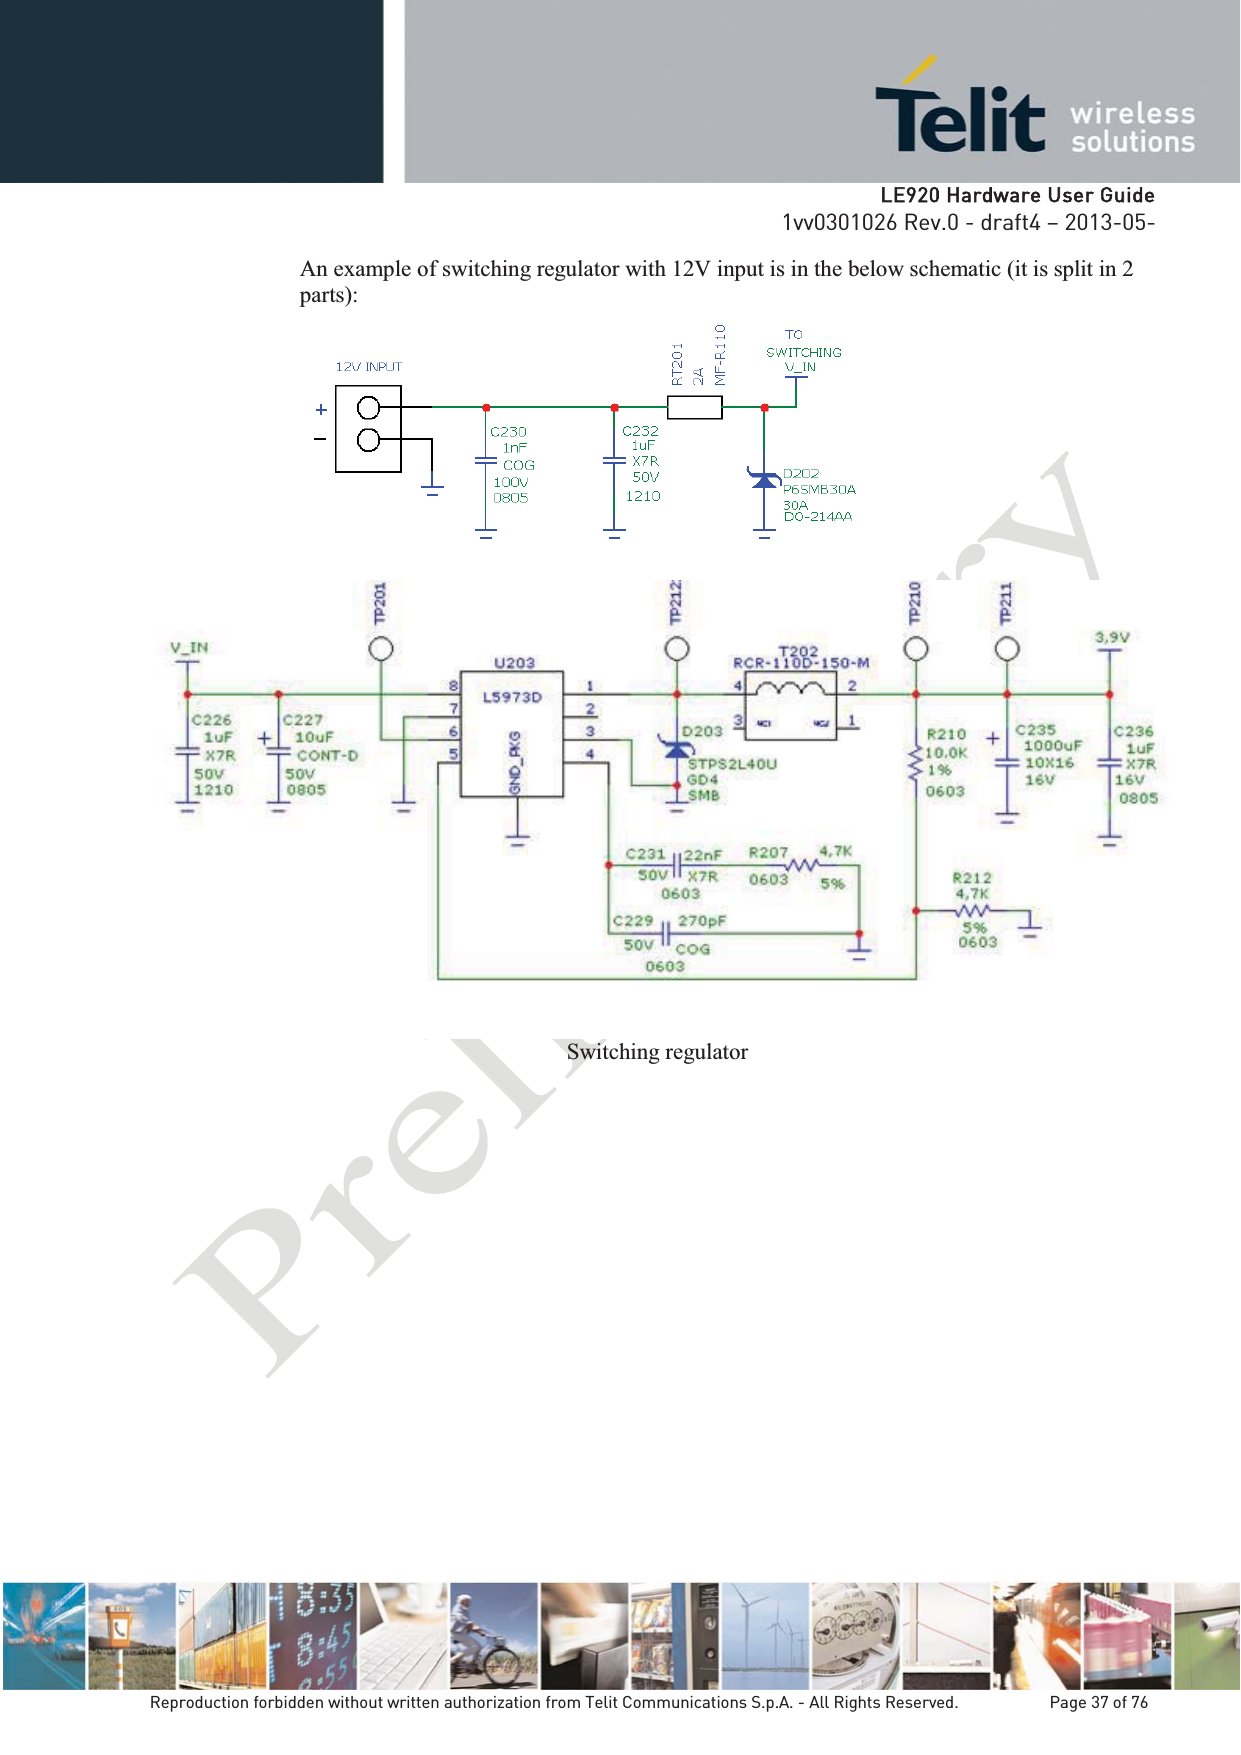   LLE920 Hardware User Guide1vv0301026 Rev.0 - draft4 – 2013-05-Reproduction forbidden without written authorization from Telit Communications S.p.A. - All Rights Reserved.    Page 37 of 76 An example of switching regulator with 12V input is in the below schematic (it is split in 2 parts):  Switching regulator  